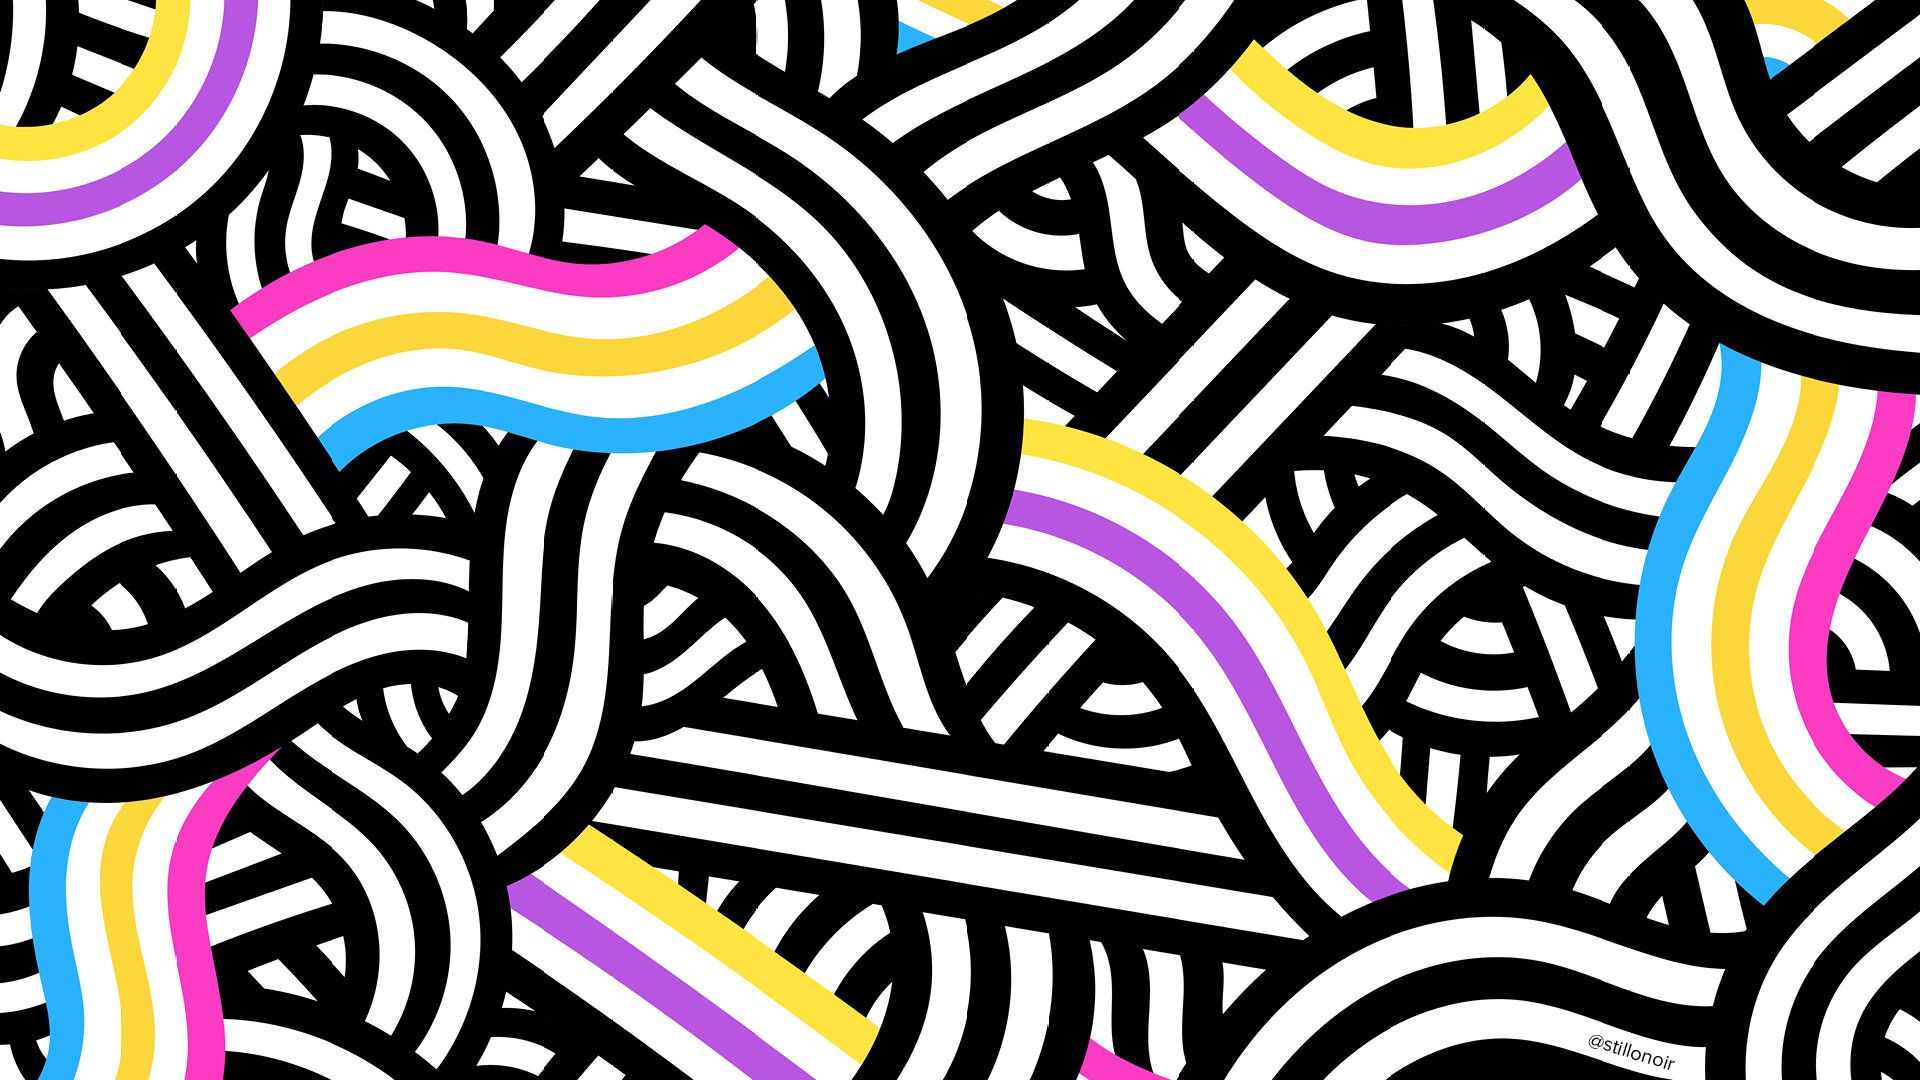 A black and white pattern with colorful lines - Non binary